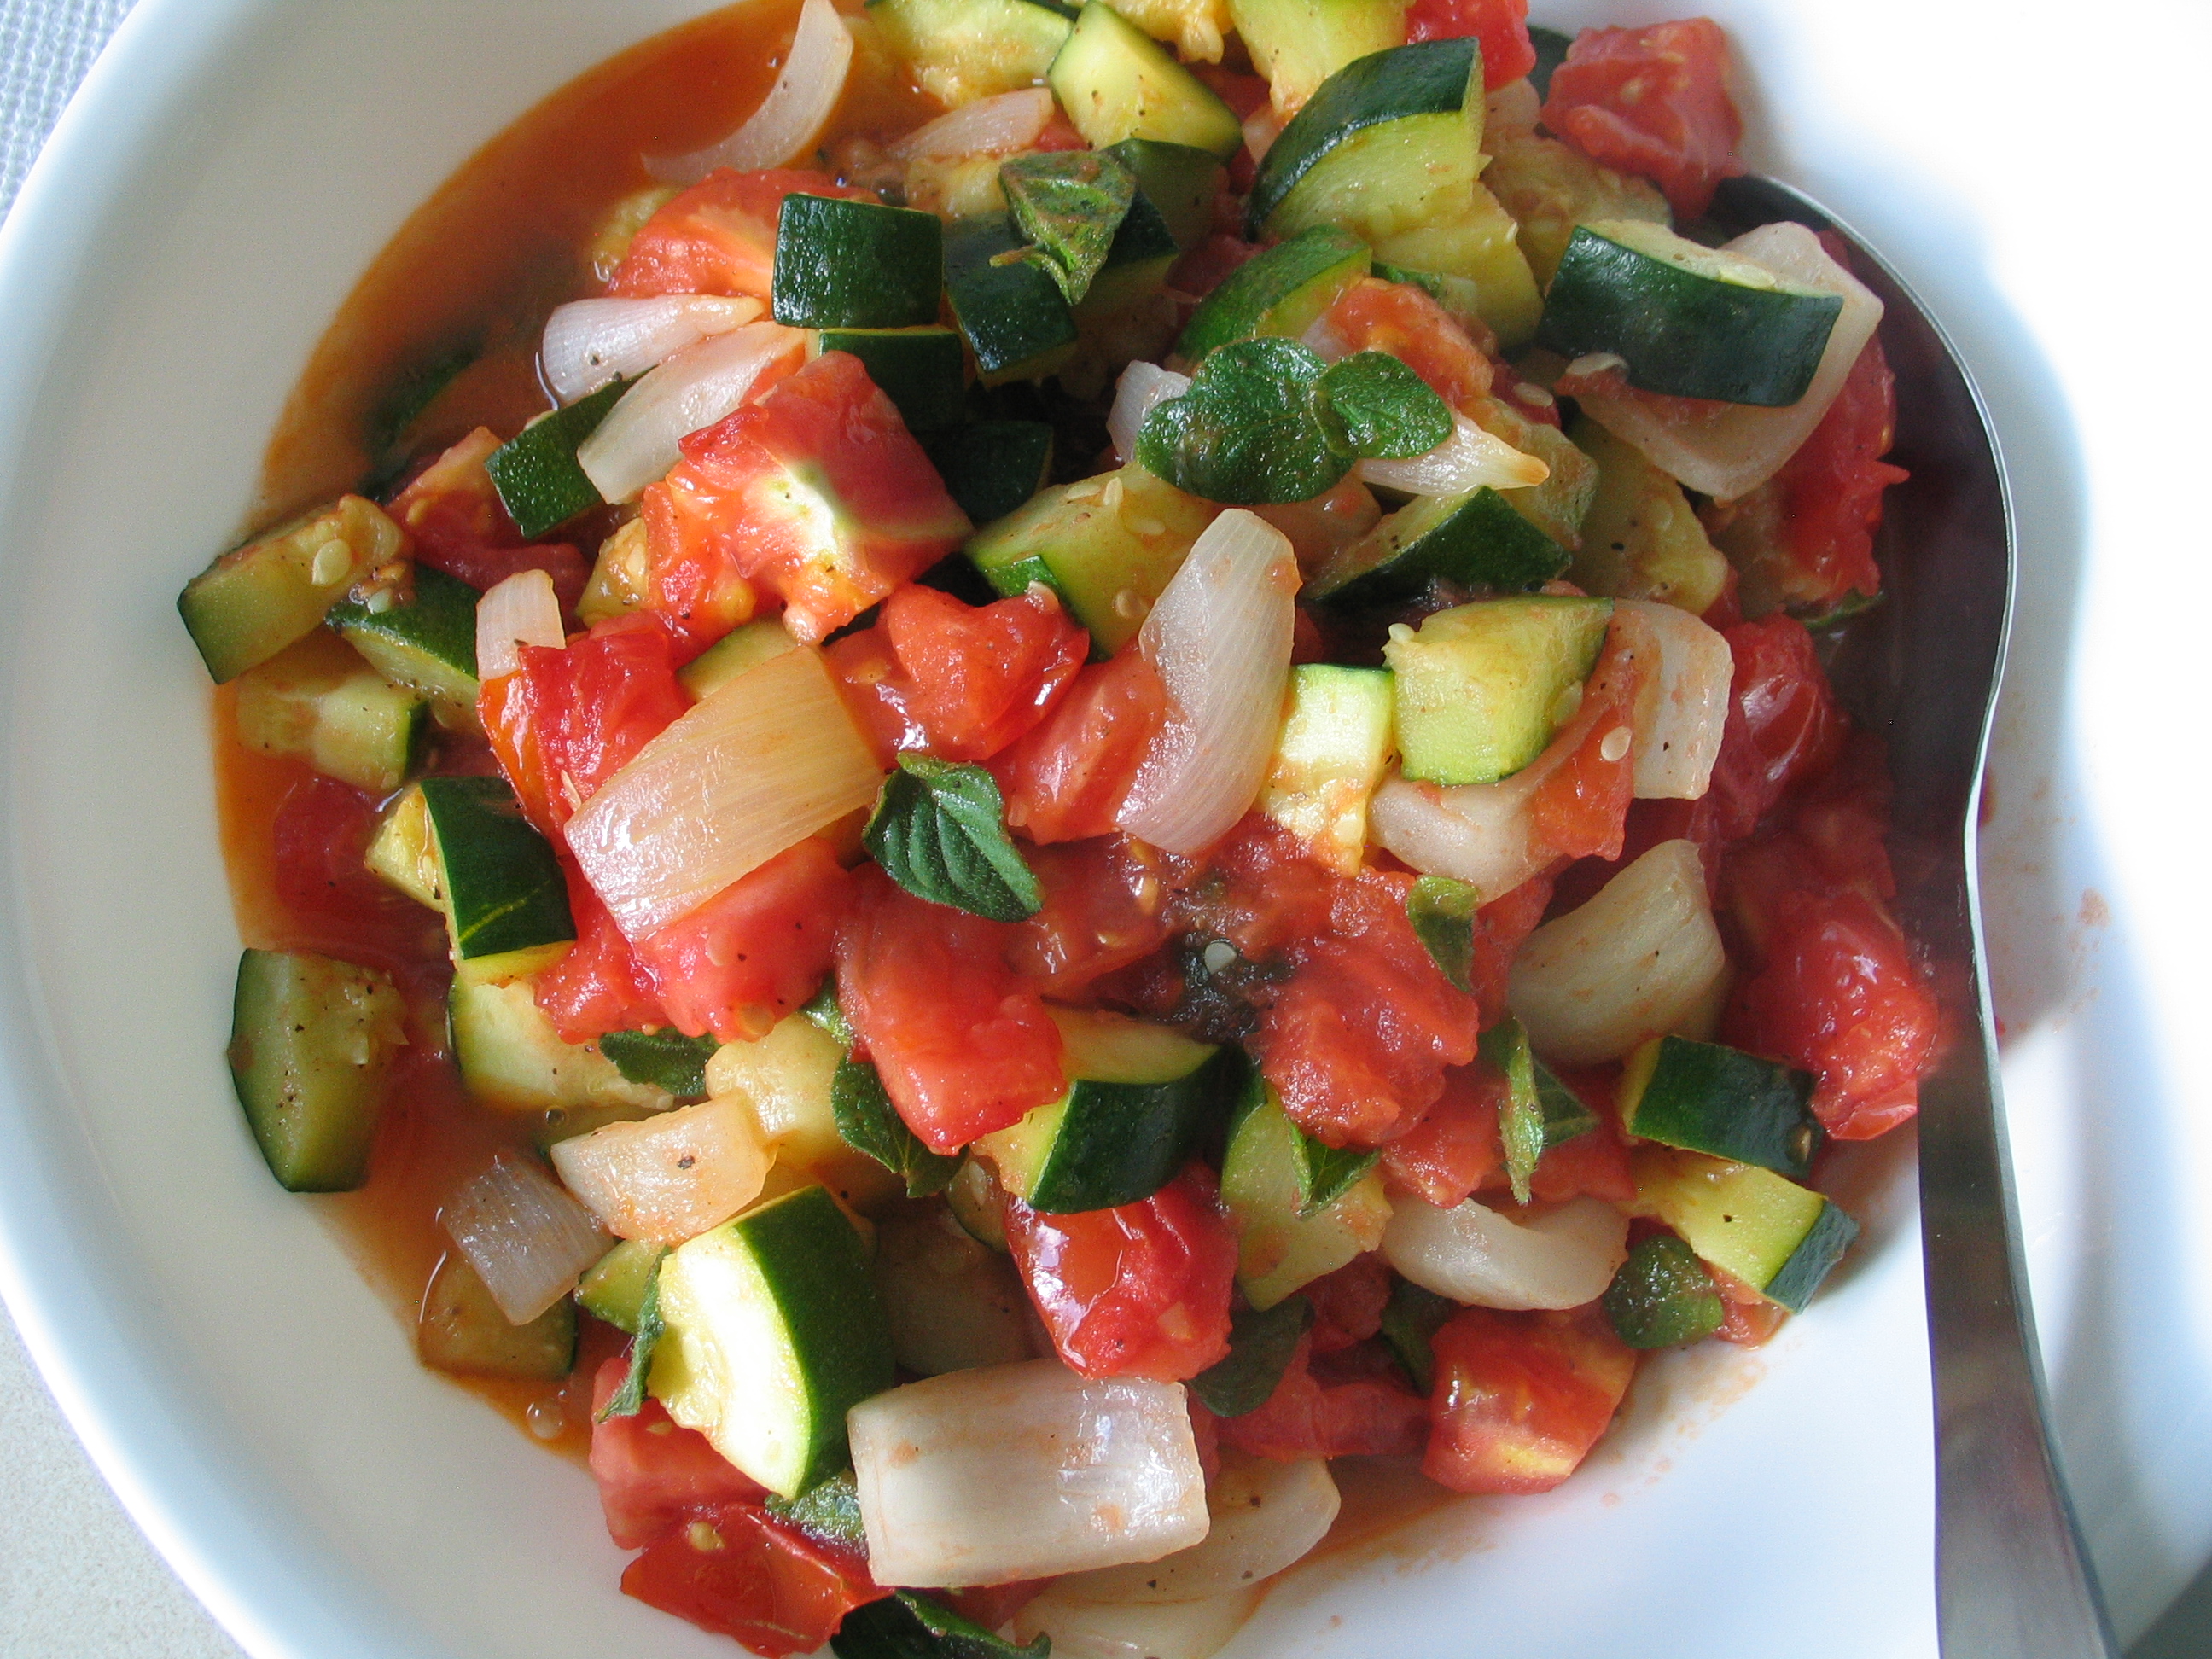 Zucchini with Tomatoes and Herbs